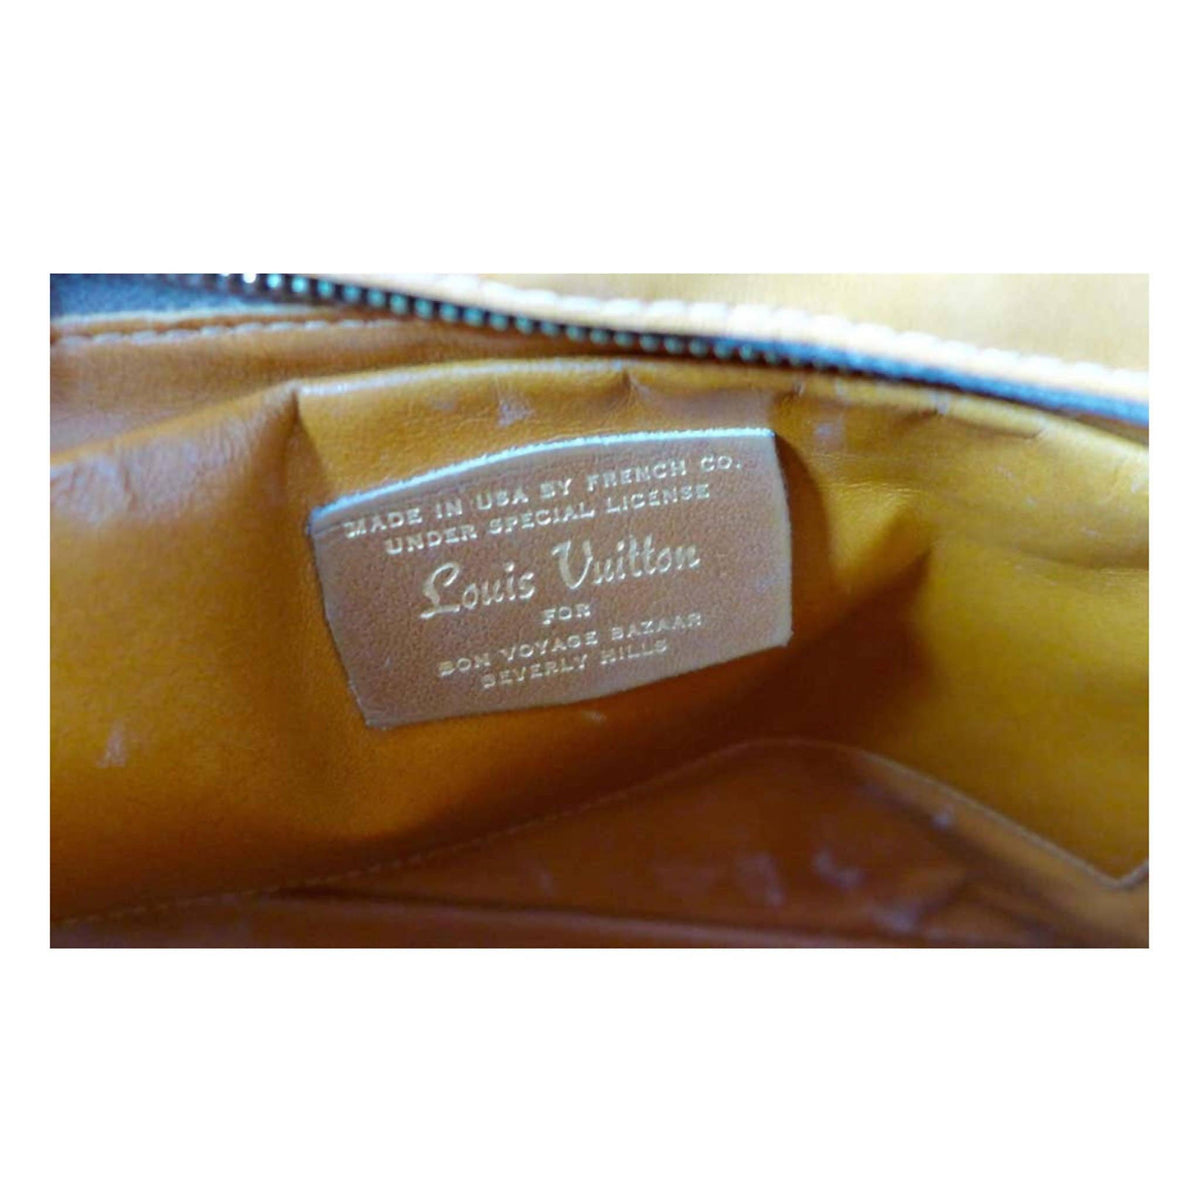 pre owned louis vuitton bags usa